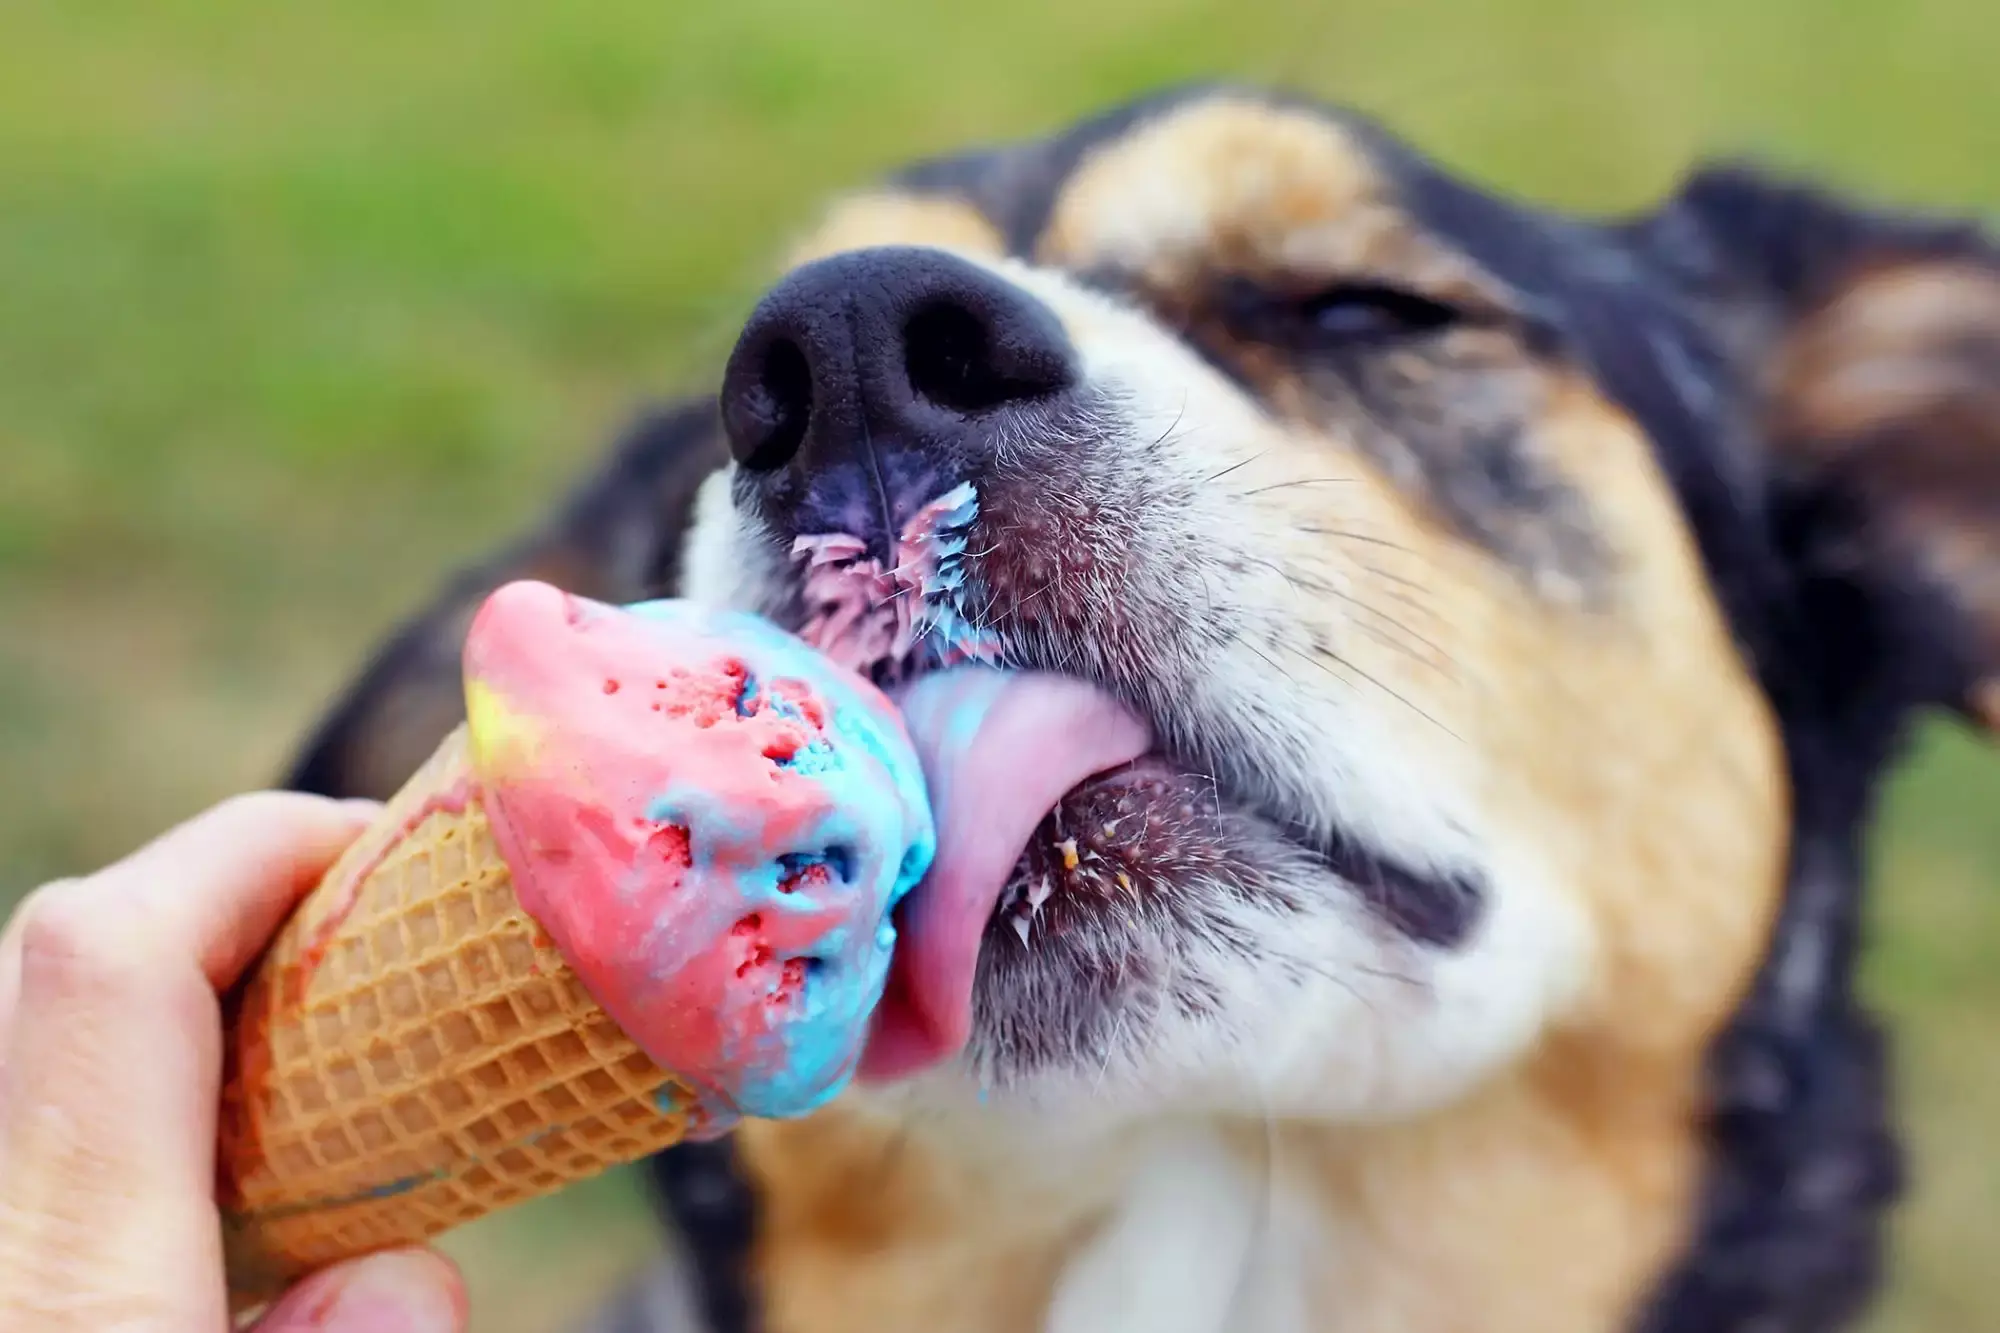 Can dogs detect sweetness?